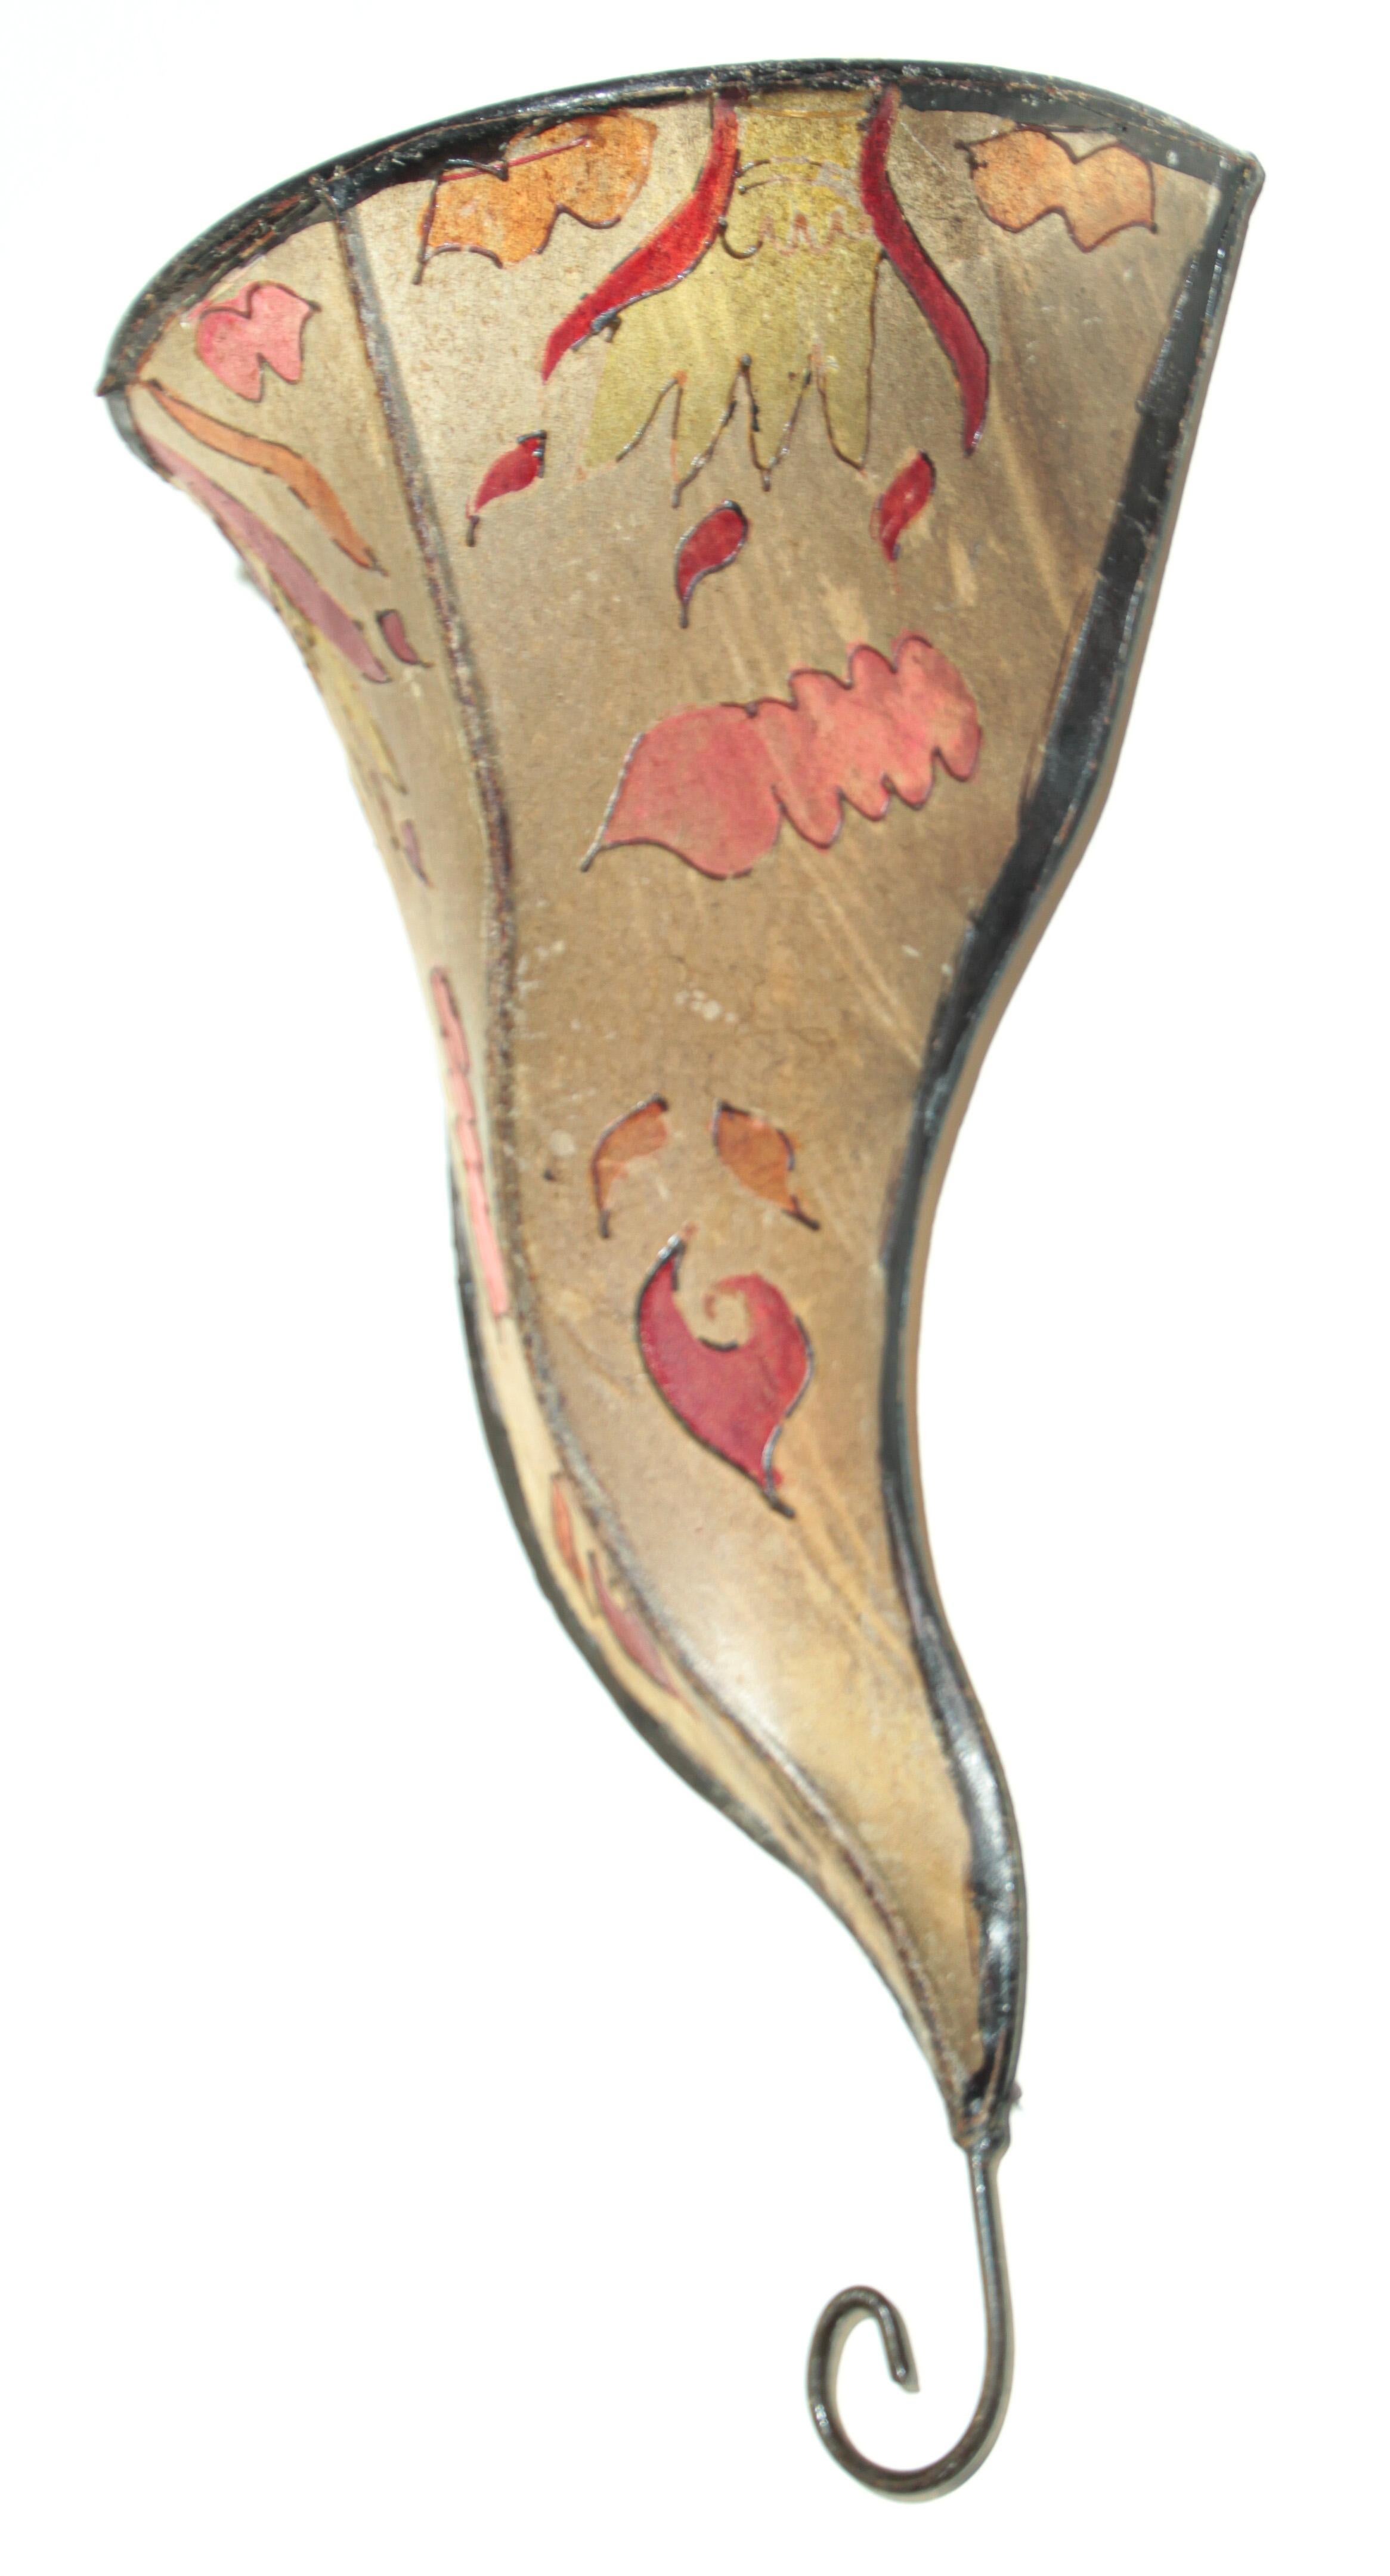 African Tribal Art parchment wall shade sconce featuring a large curved hide form stitched on iron and hand painted surface.
These Moroccan Art pieces could be used as wall lamp shade.
Iron frame covered with hide parchment which has been hand